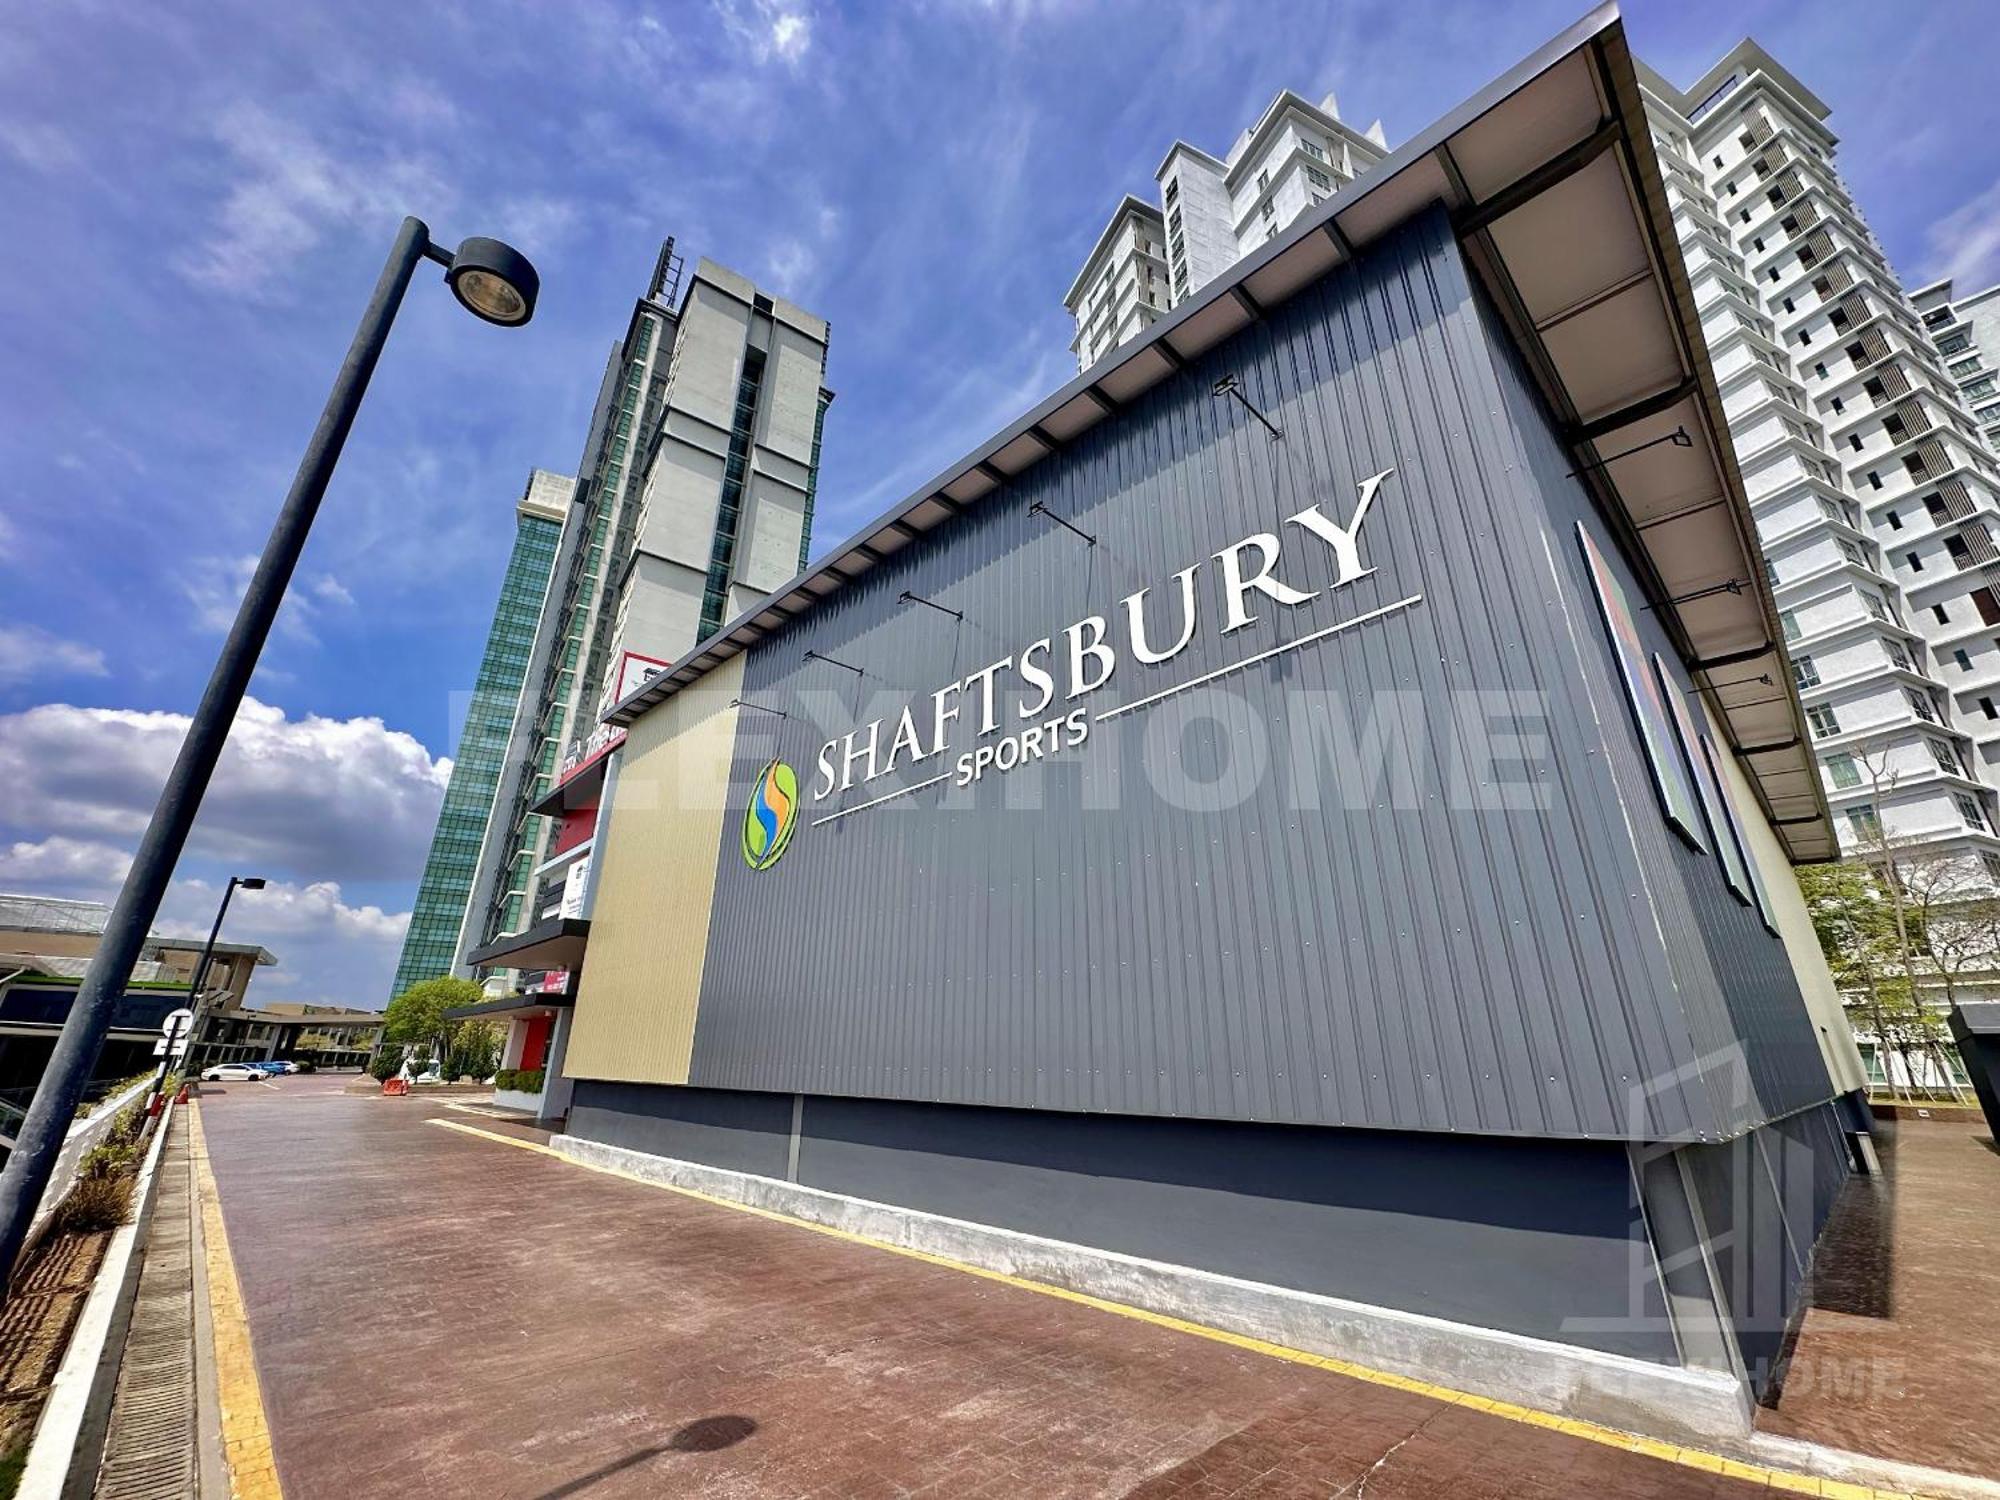 10Am-6Pm, Same Day Check In And Check Out, Work From Home, Shaftsbury-Cyberjaya, Comfy Home By Flexihome-My Exterior photo